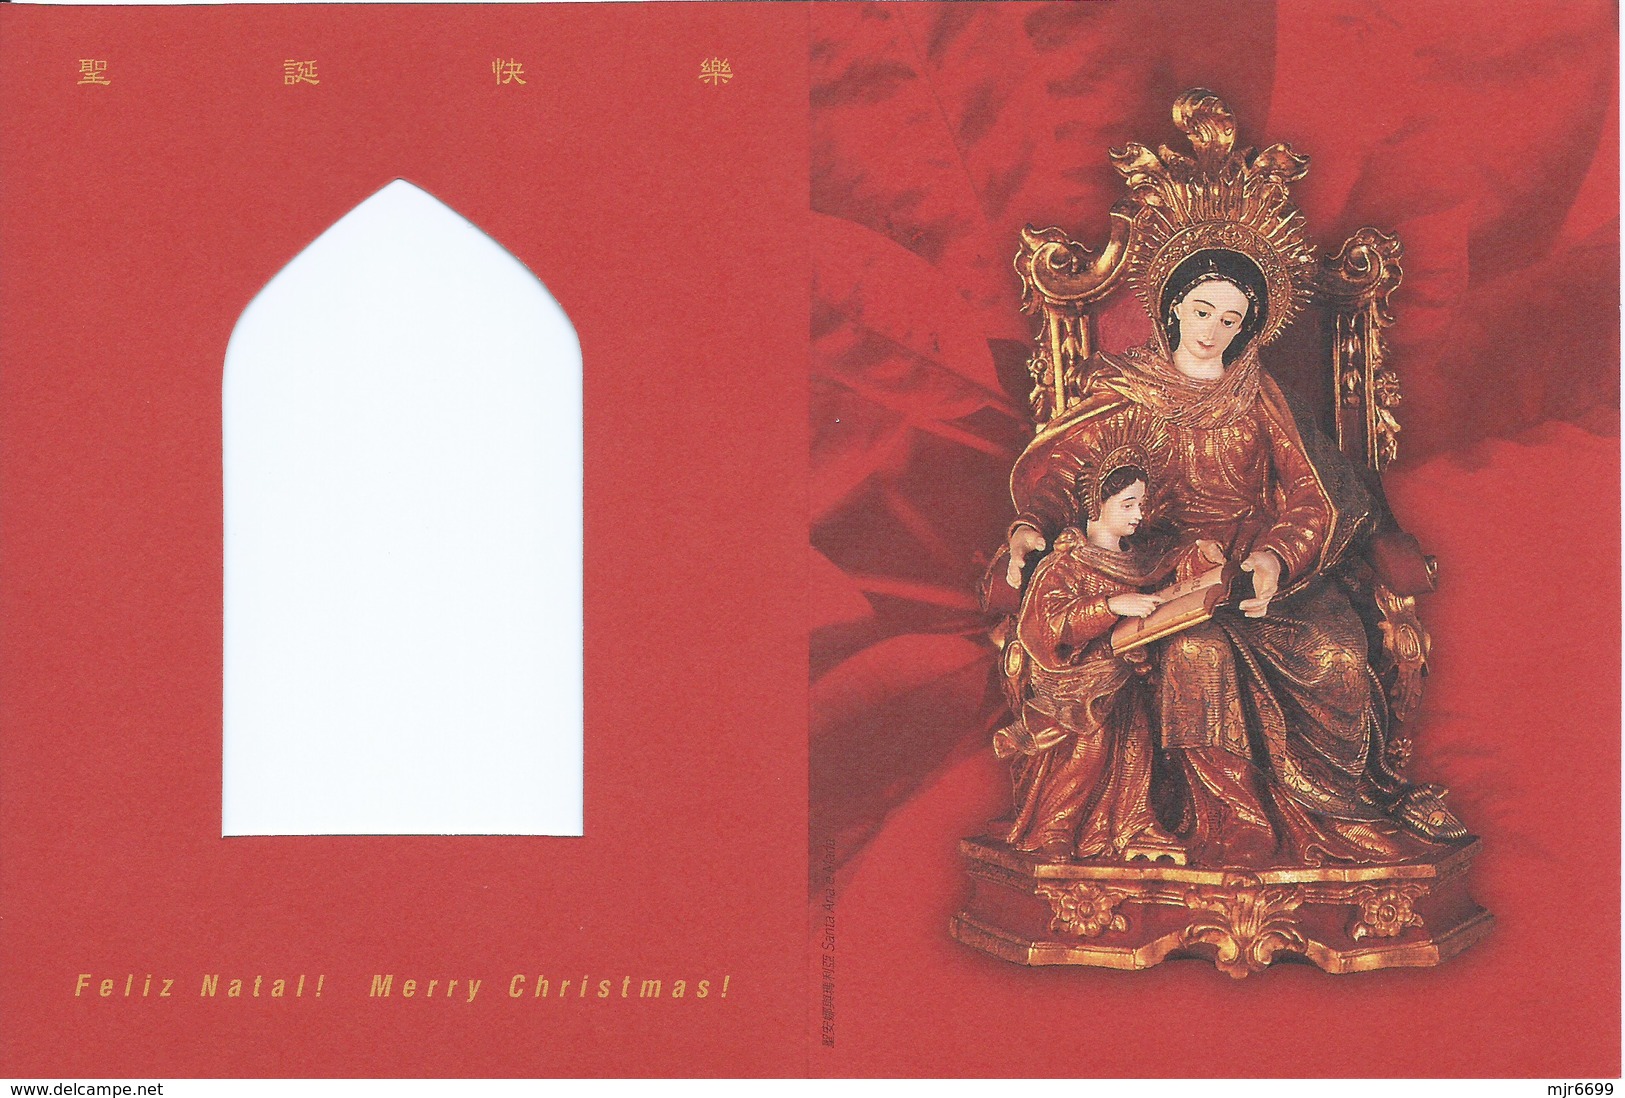 MACAU 2000 CHRISTMAS GREETING CARD & POSTAGE PAID COVER POST OFFICE CODE #BPD001 - Postal Stationery